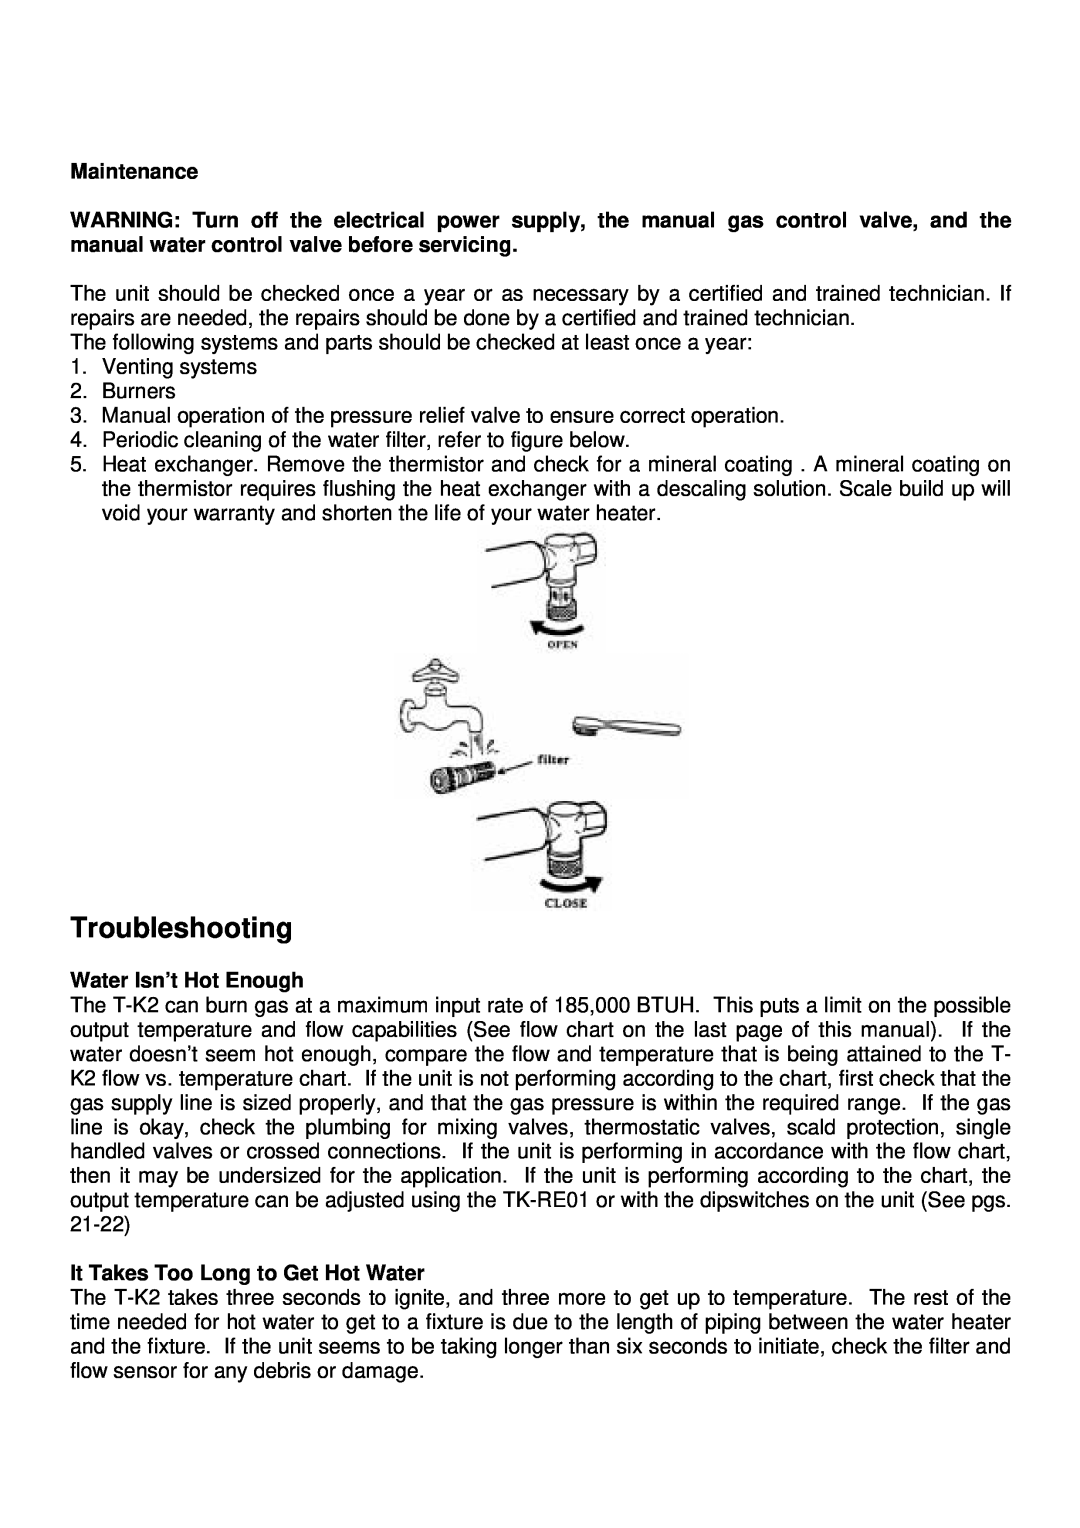 Whirlpool T-K2 installation manual Troubleshooting, Maintenance, Water Isn’t Hot Enough, It Takes Too Long to Get Hot Water 